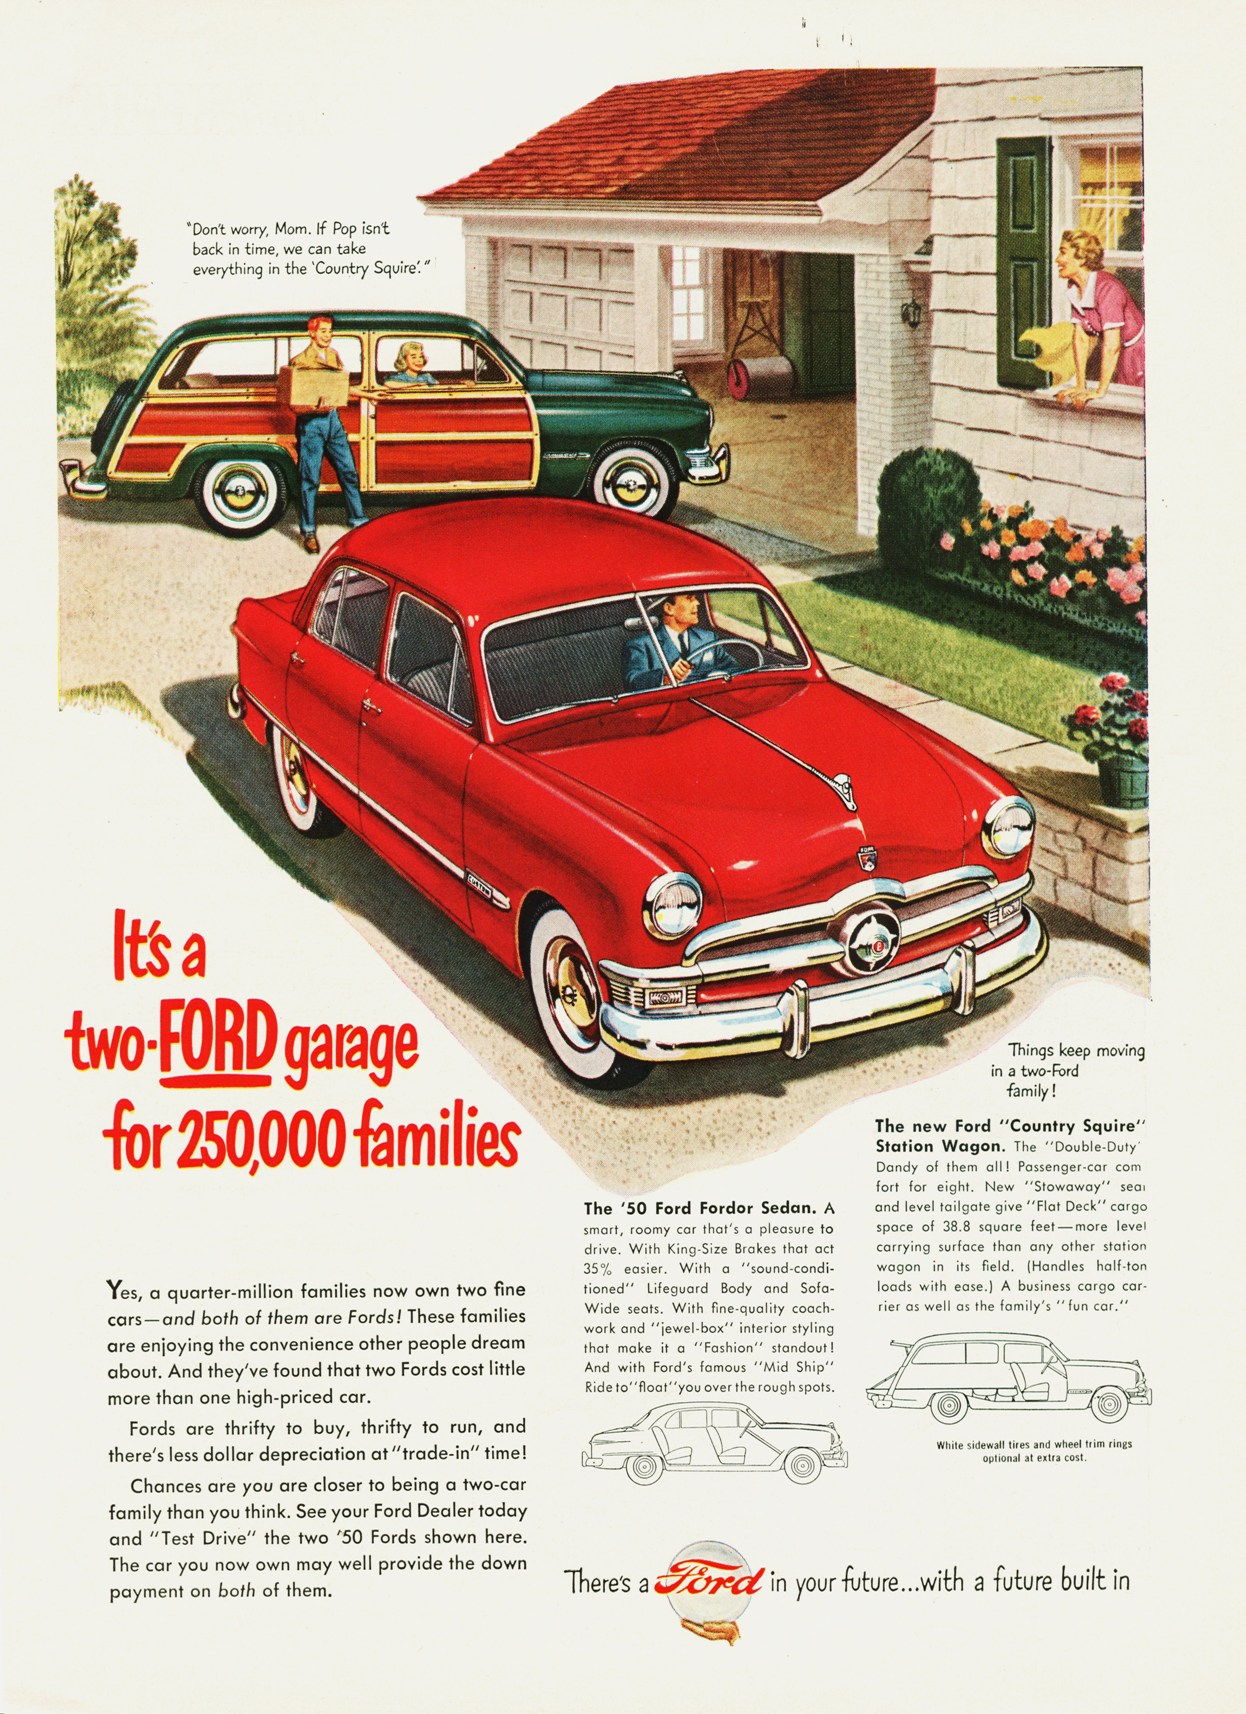 Ford adverts 1950s